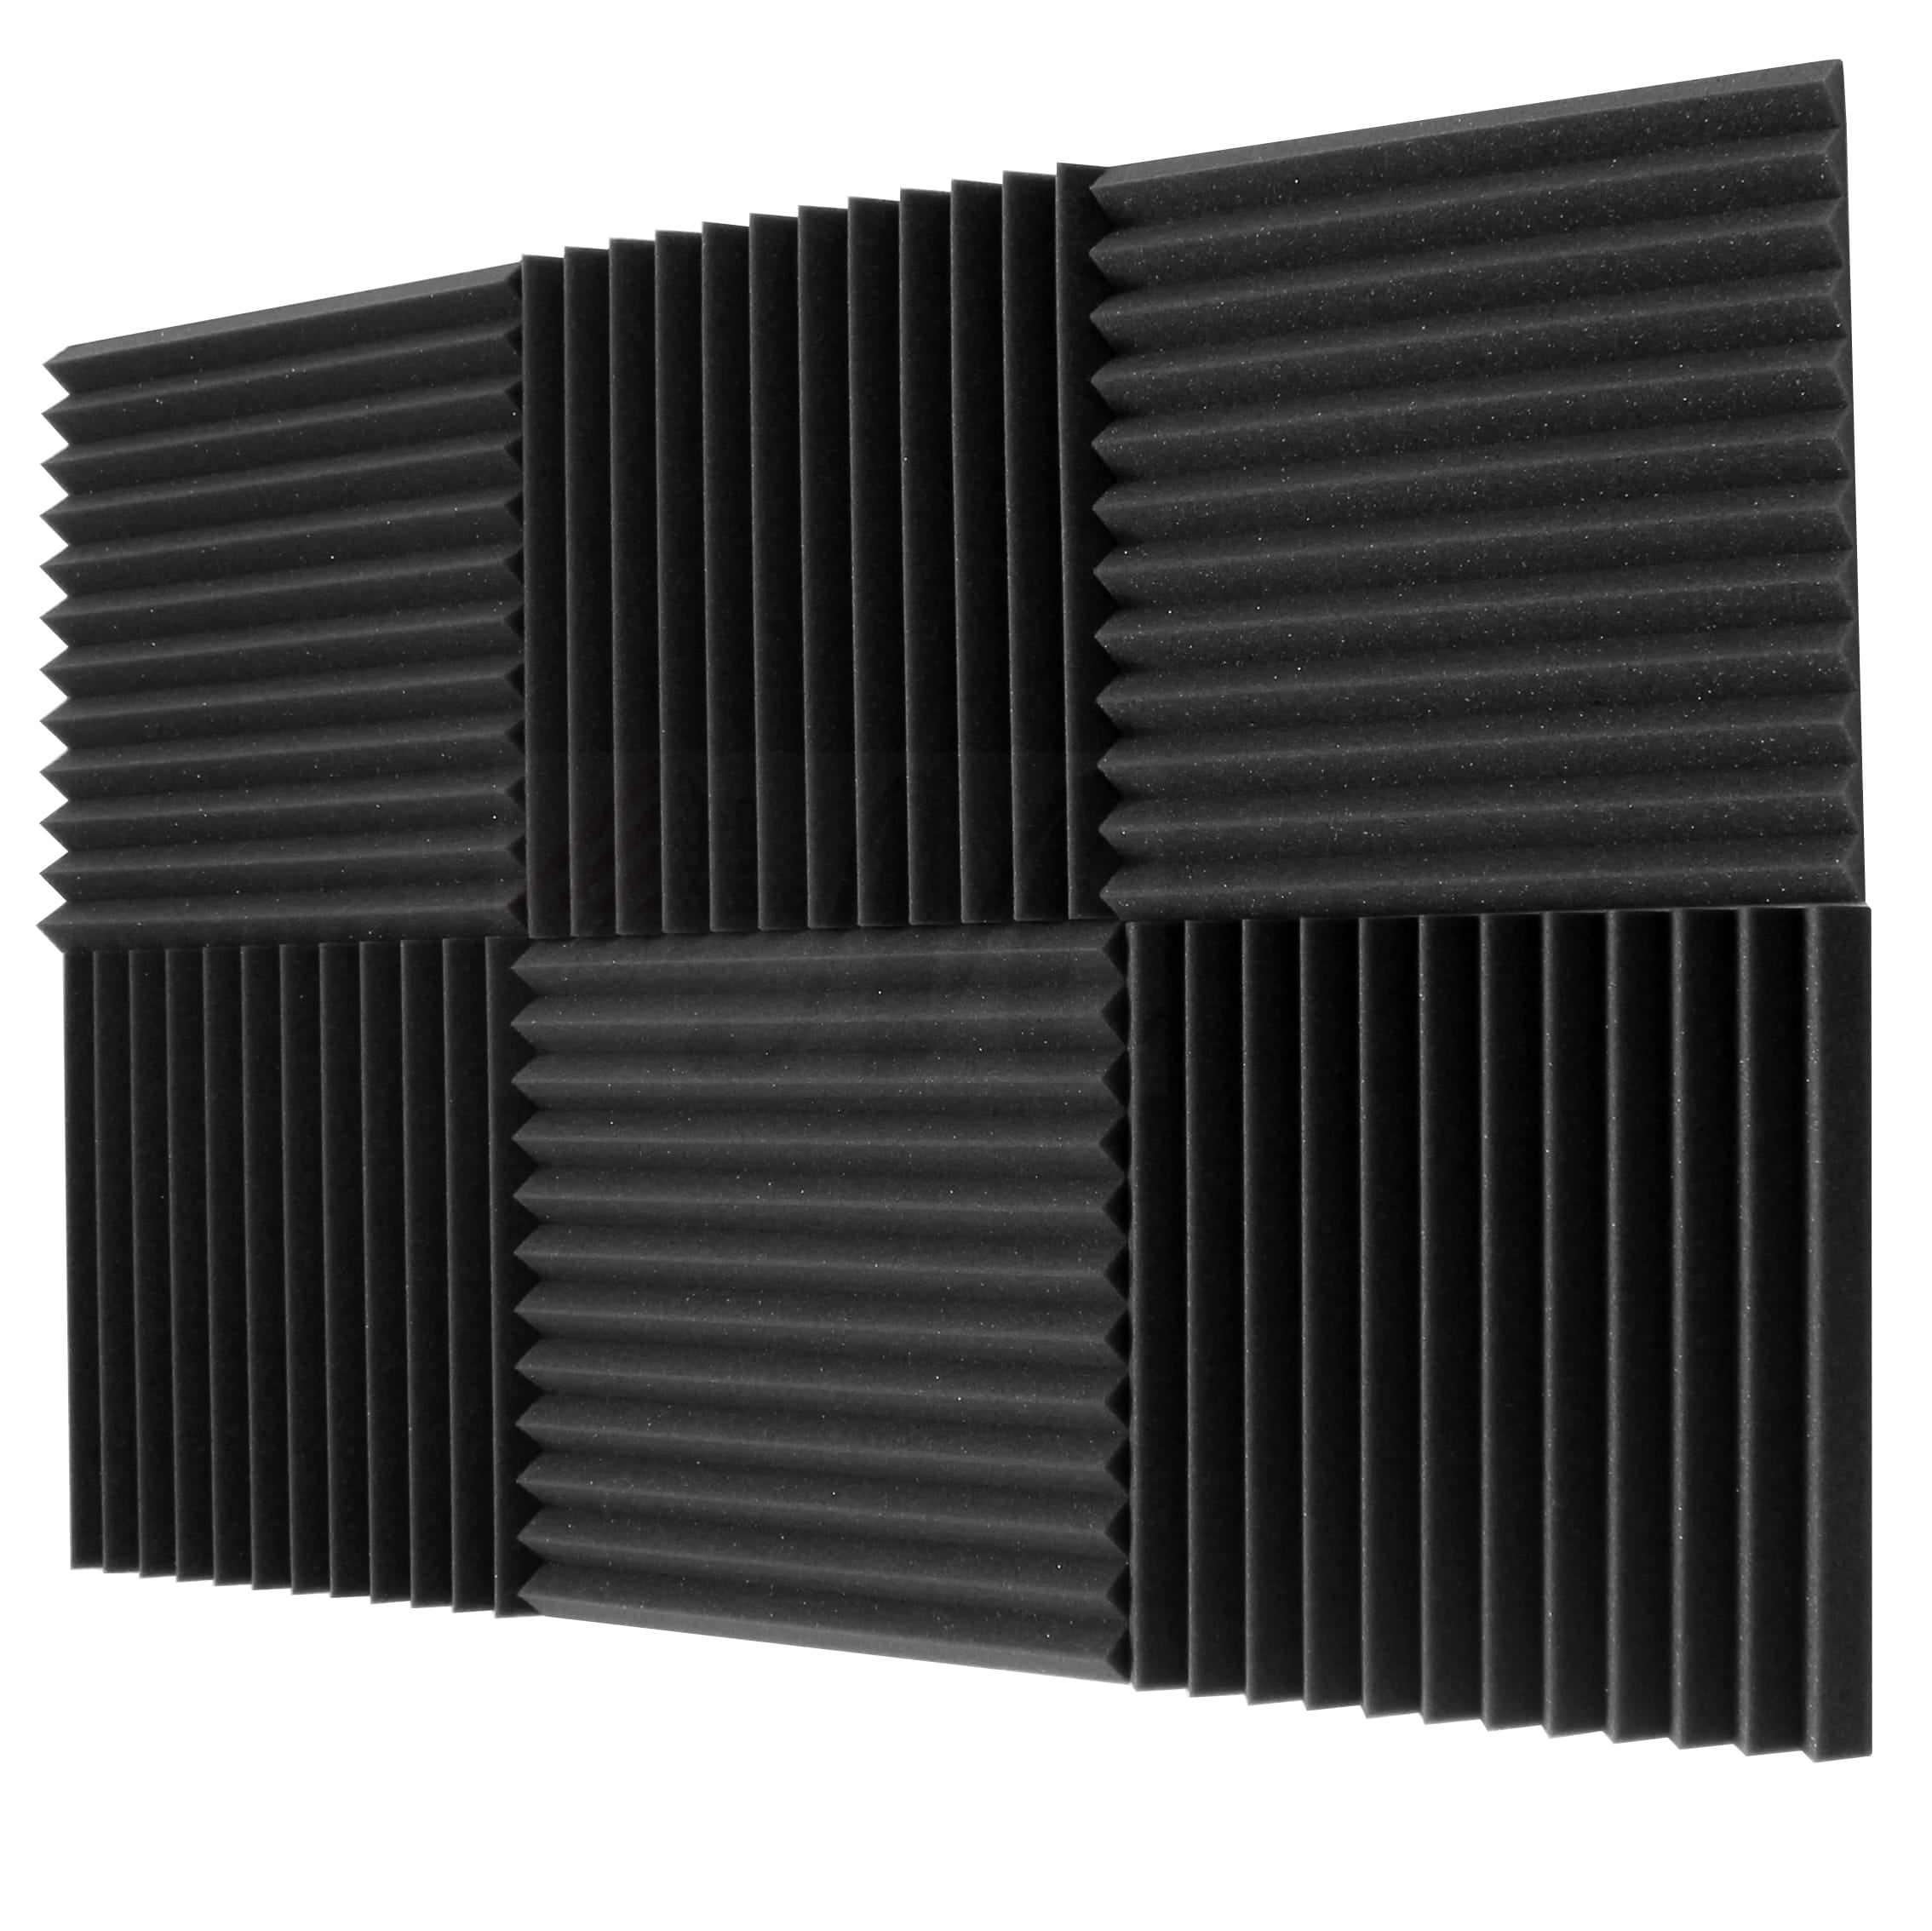 12 PACK Acoustic Foam,Self-adhesive Sound Proof Panels,12 X 10.5 X 0.4 Inches Sound Proof Foam Panel,High Density Fireproof Wall Panels,Acoustic Treatment for Studio,Office,Home,Gaming Room WHITE 